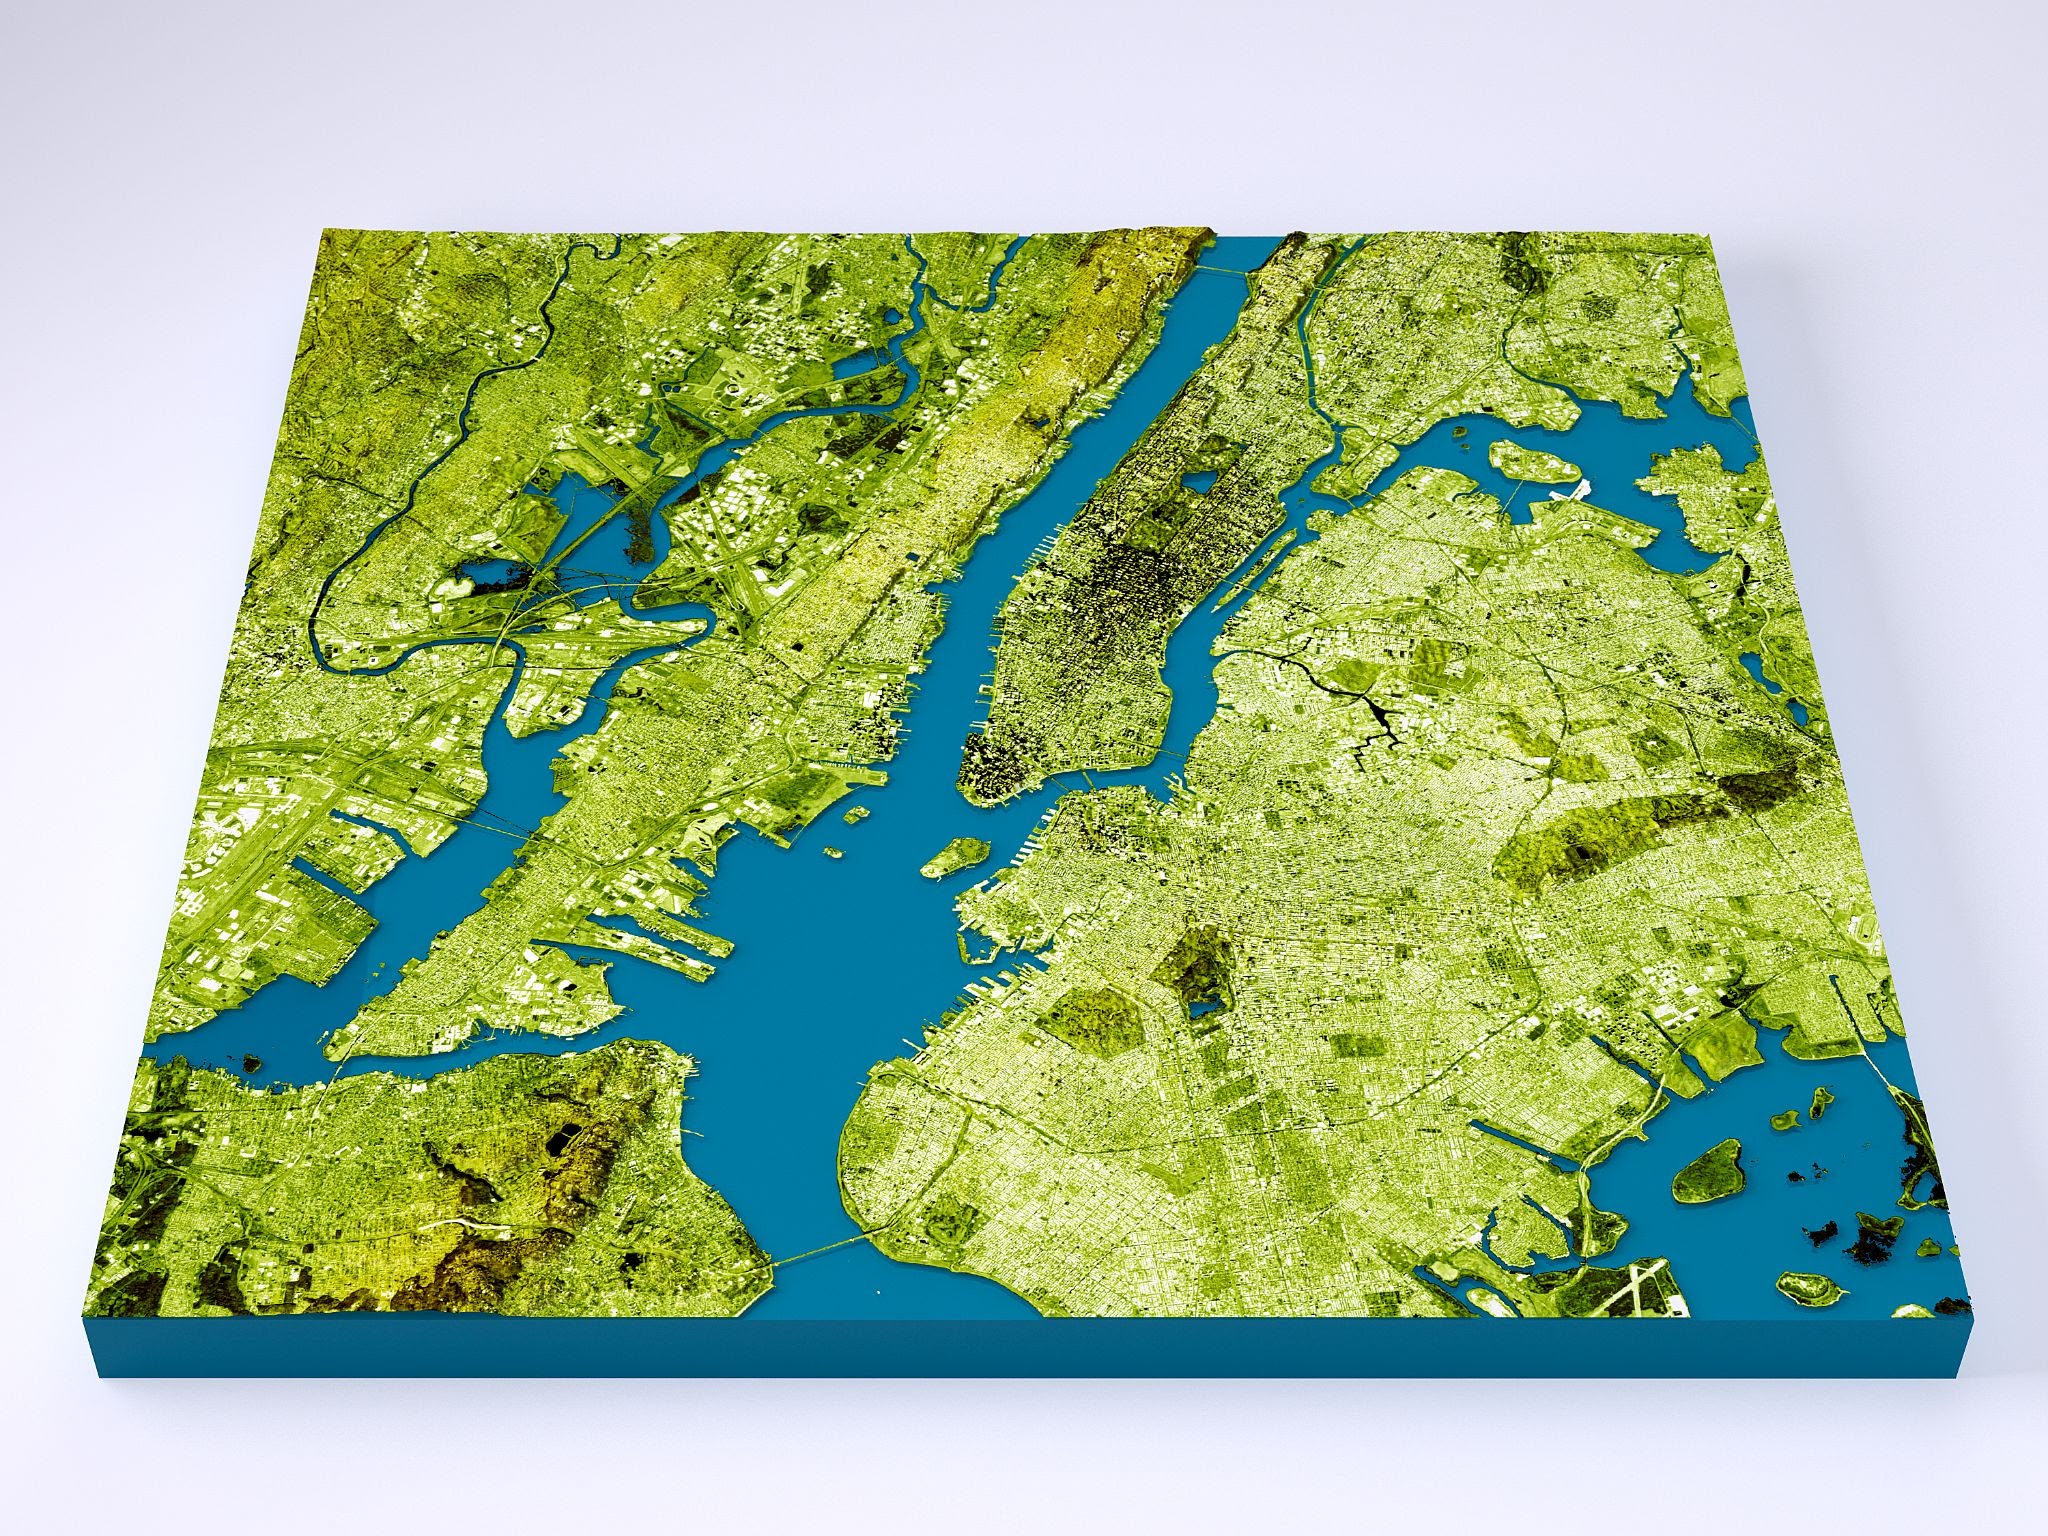 A topographical map